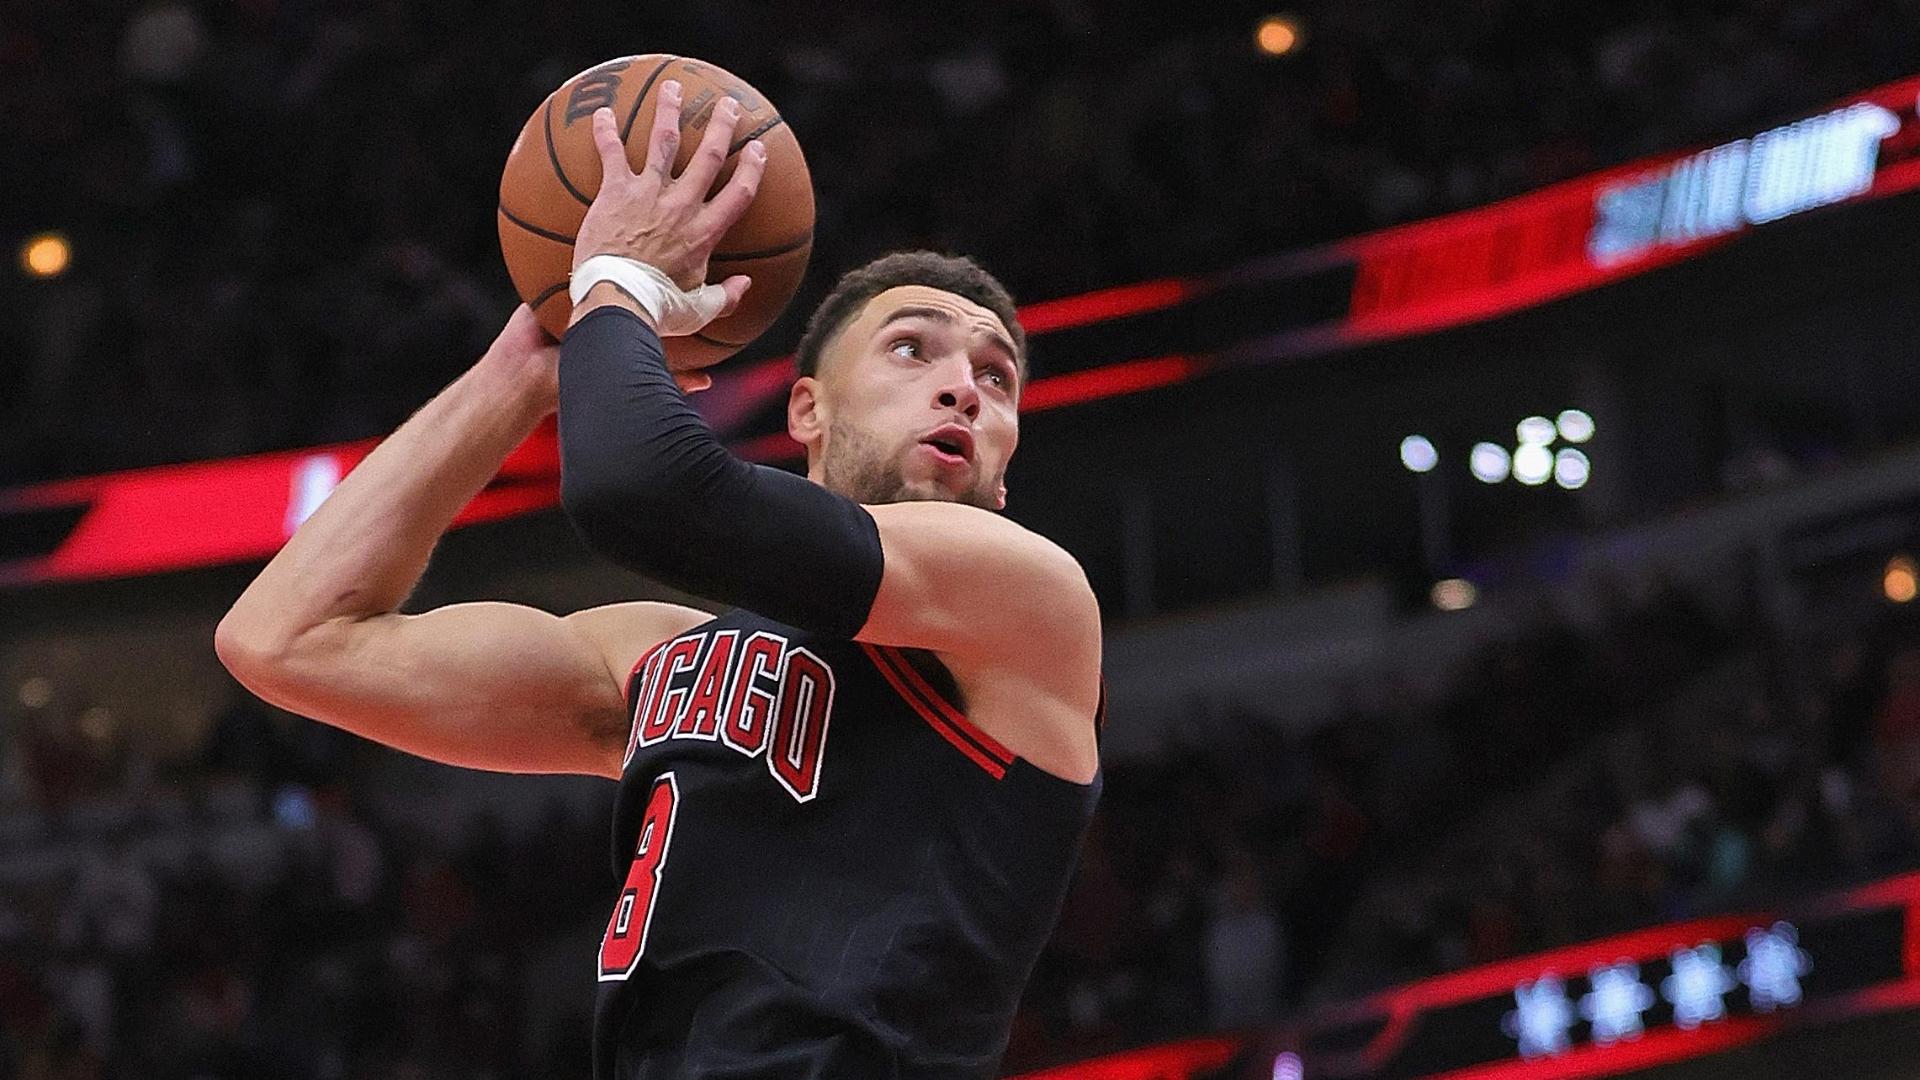 Chicago Bulls: The Bulls surprised Zach LaVine with a sweet zoom call